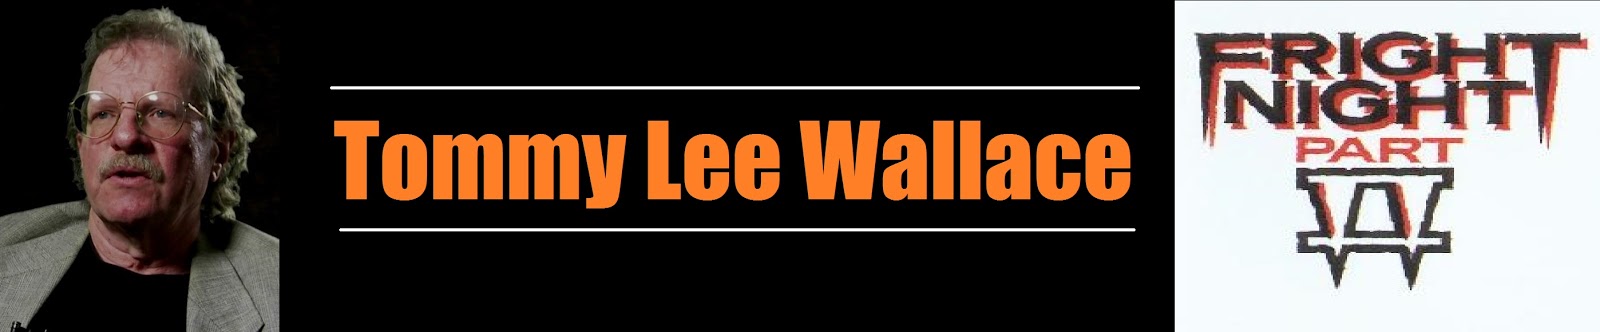 lee-wallace-actor-2015